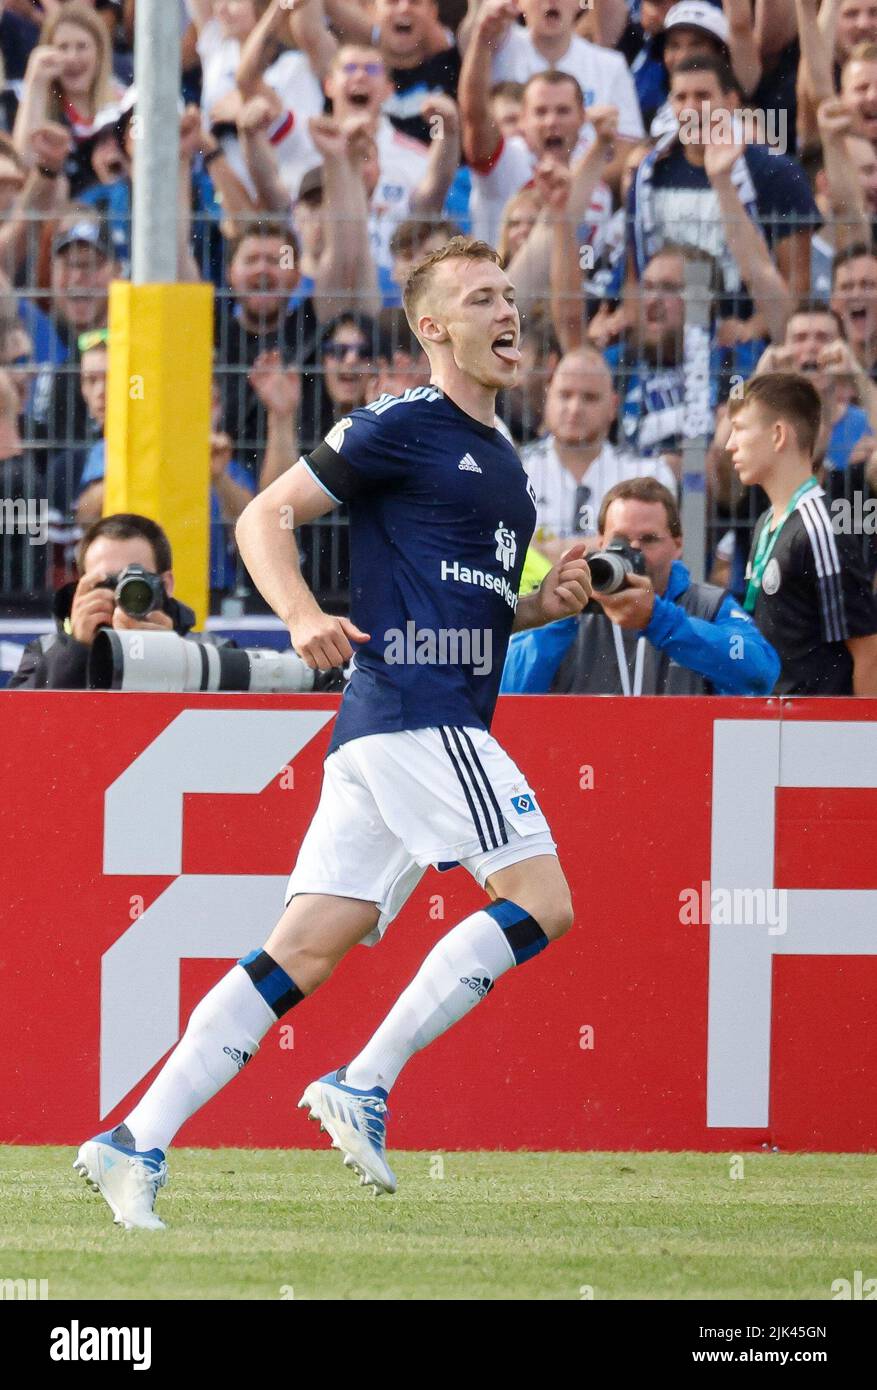 Bayreuth, Germany. 30th July, 2022. Soccer: DFB-Pokal, SpVgg Bayreuth - Hamburger SV, 1st round, Hans-Walter-Wild-Stadion: Hamburg's Sebastian Schonlau celebrates his goal to make it 1:2. Credit: Daniel Löb/dpa - IMPORTANT NOTE: In accordance with the requirements of the DFL Deutsche Fußball Liga and the DFB Deutscher Fußball-Bund, it is prohibited to use or have used photographs taken in the stadium and/or of the match in the form of sequence pictures and/or video-like photo series./dpa/Alamy Live News Stock Photo